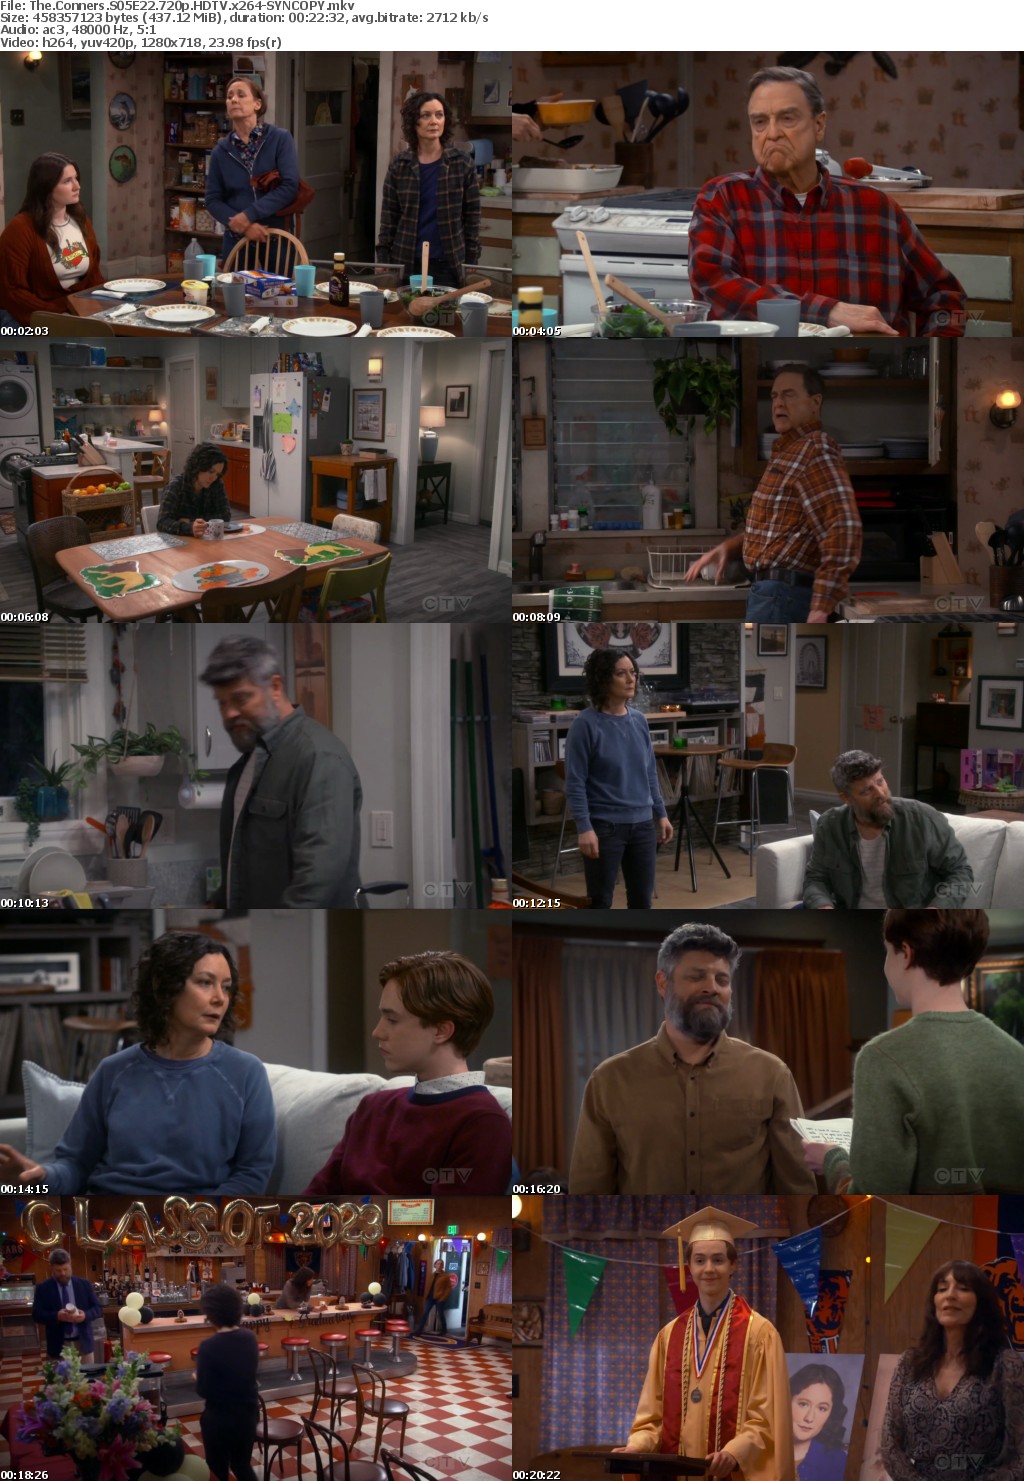 The Conners S05E22 720p HDTV x264-SYNCOPY